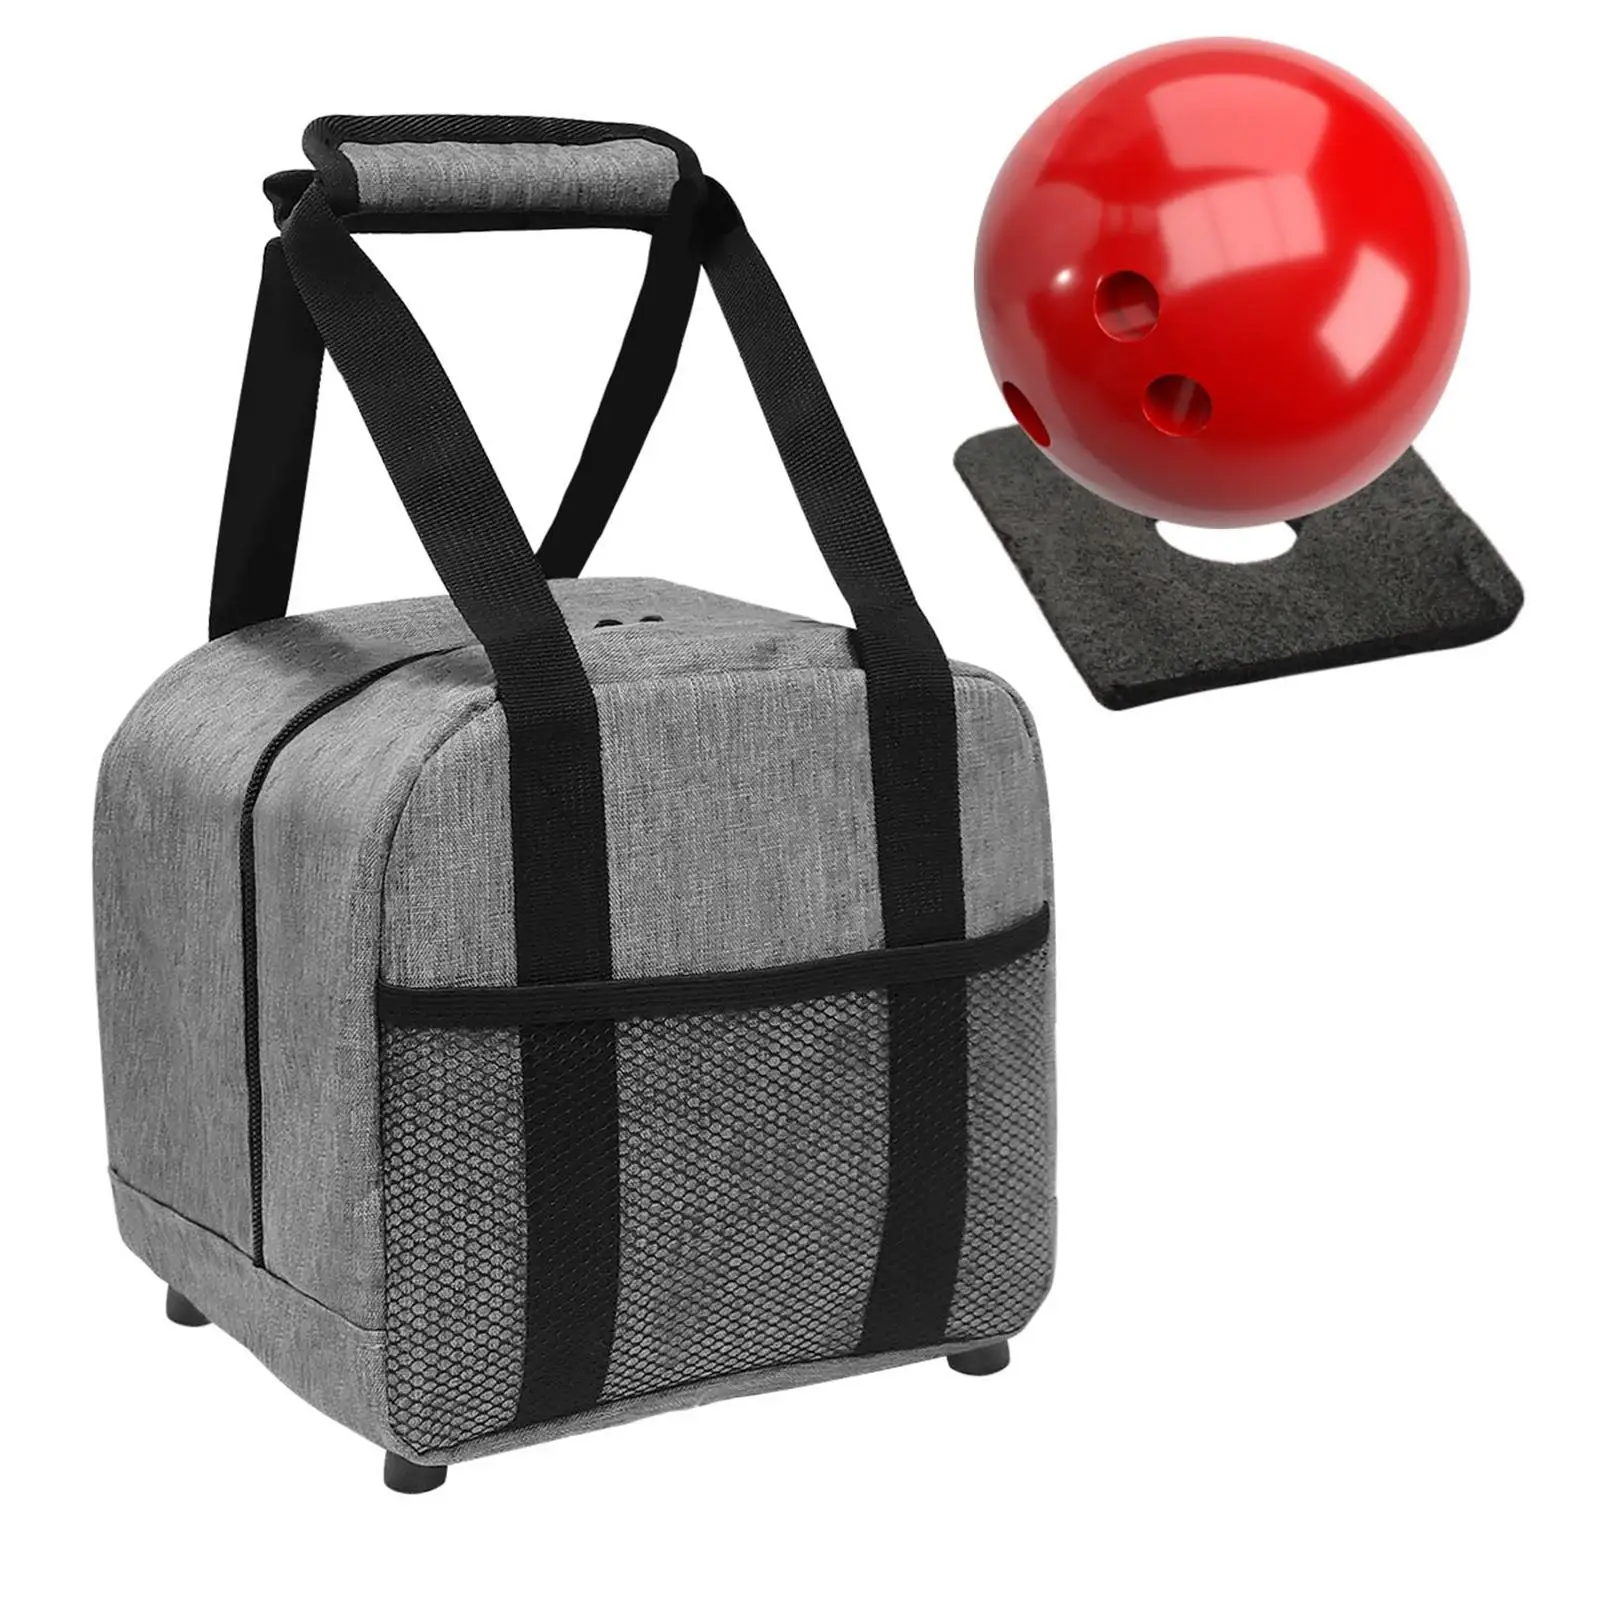 Bowling Ball Bag Container Case Oxford Fabric Bowling Carrying Bag Single Bowling Tote for Outdoor Sports Training Women Men